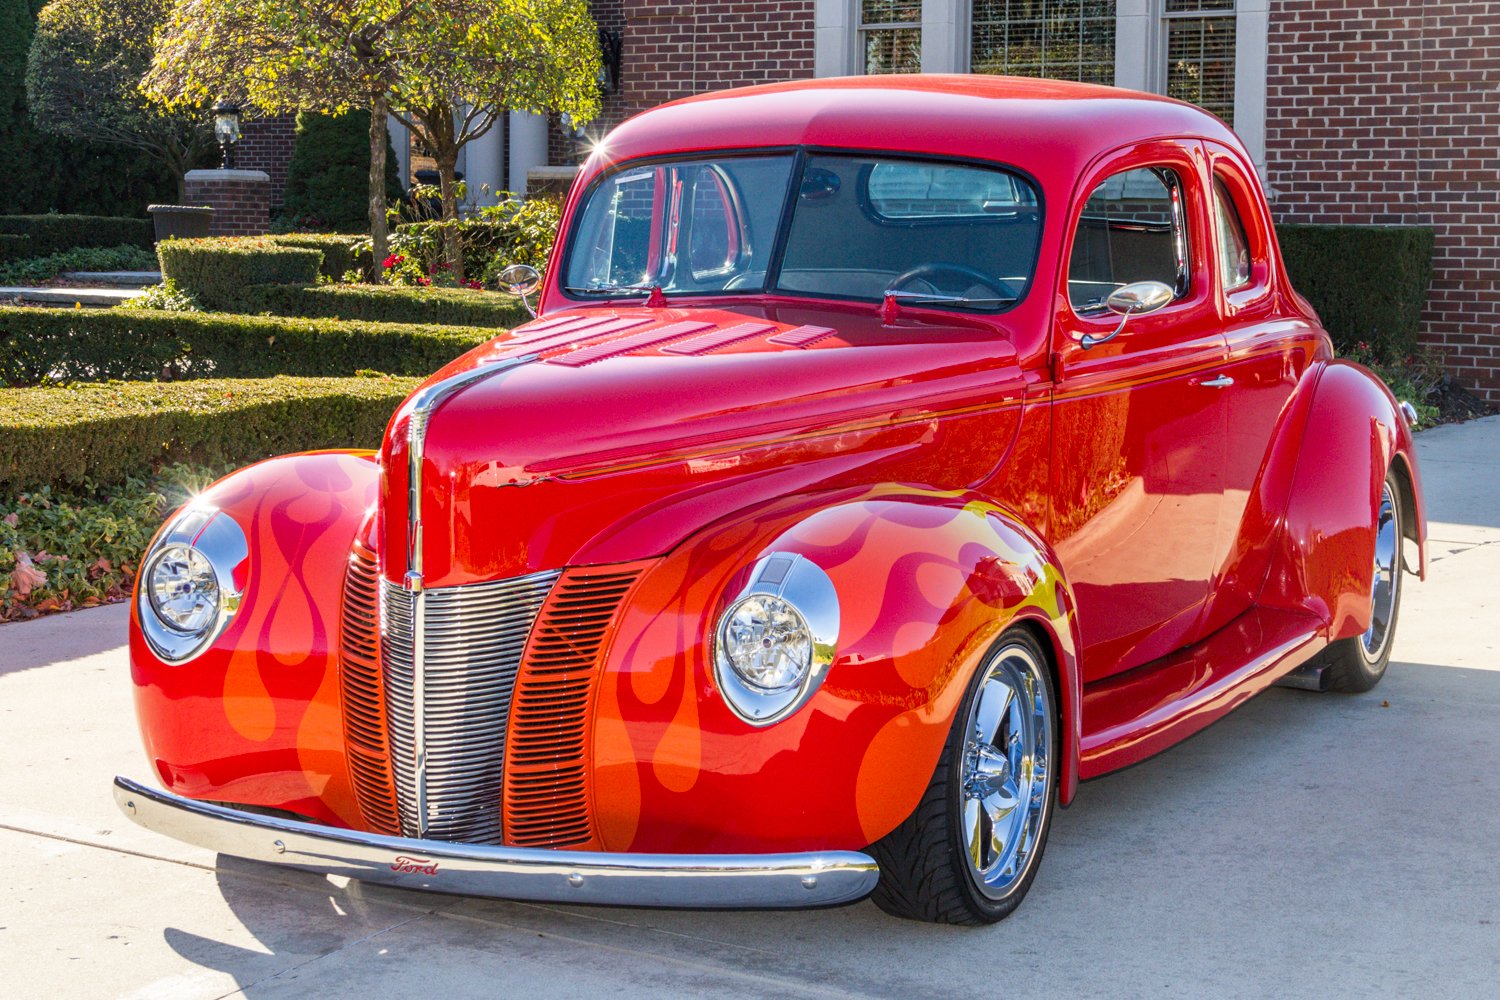 1940 Ford Coupe | Classic Cars for Sale Michigan: Muscle & Old Cars